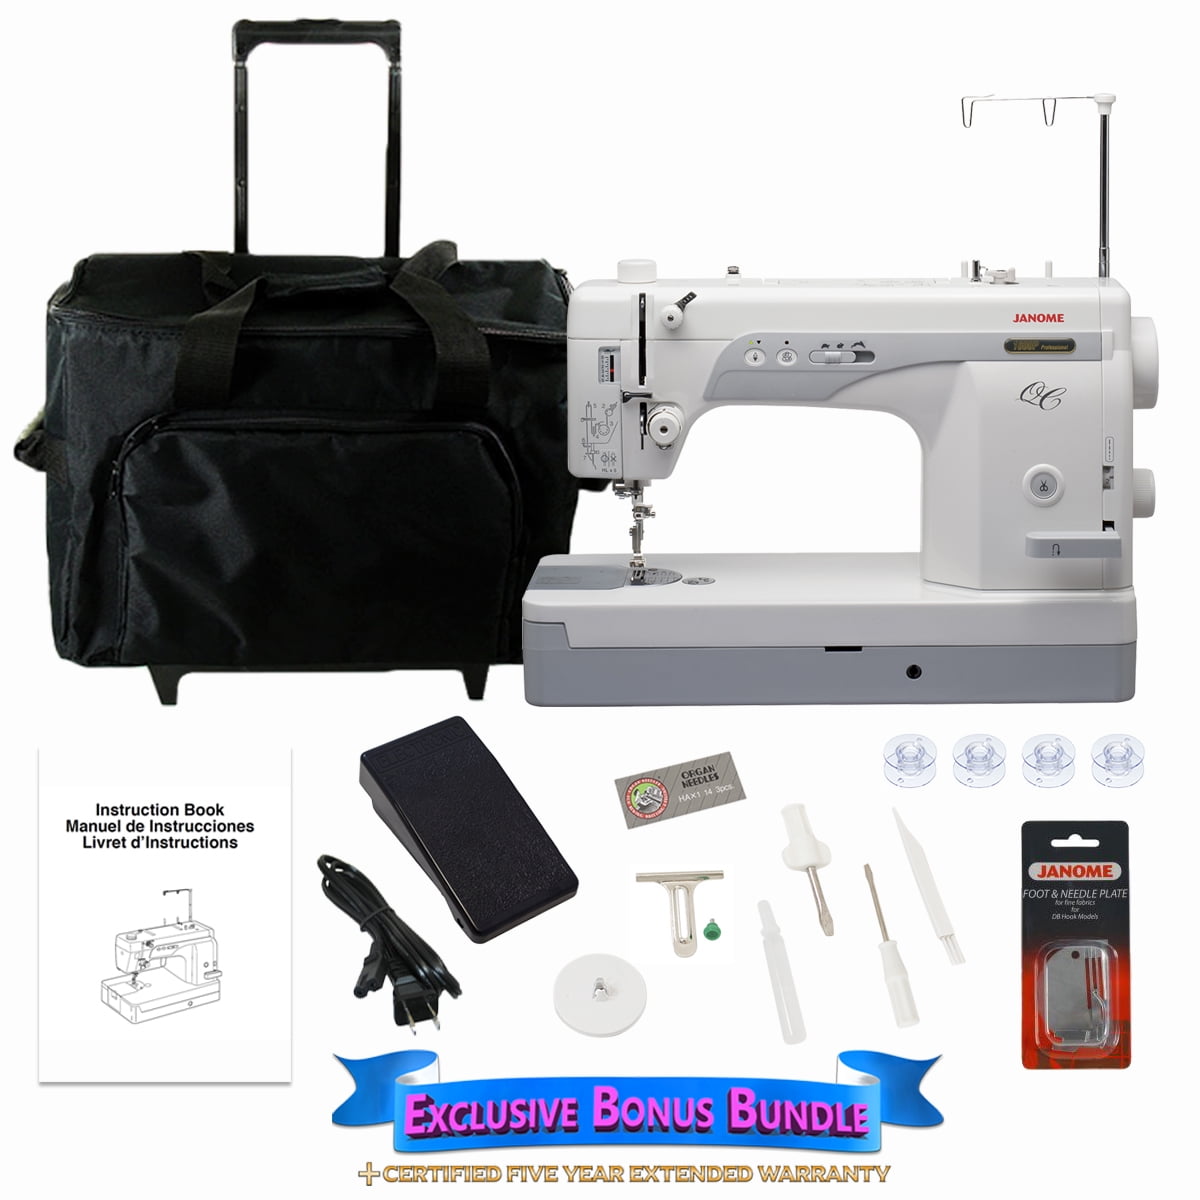 Janome Industrial-Grade Aluminum-Body HD1000 Black Edition Sewing Machine  with 14 Stitches, 4-Step Buttonhol, and Accessories